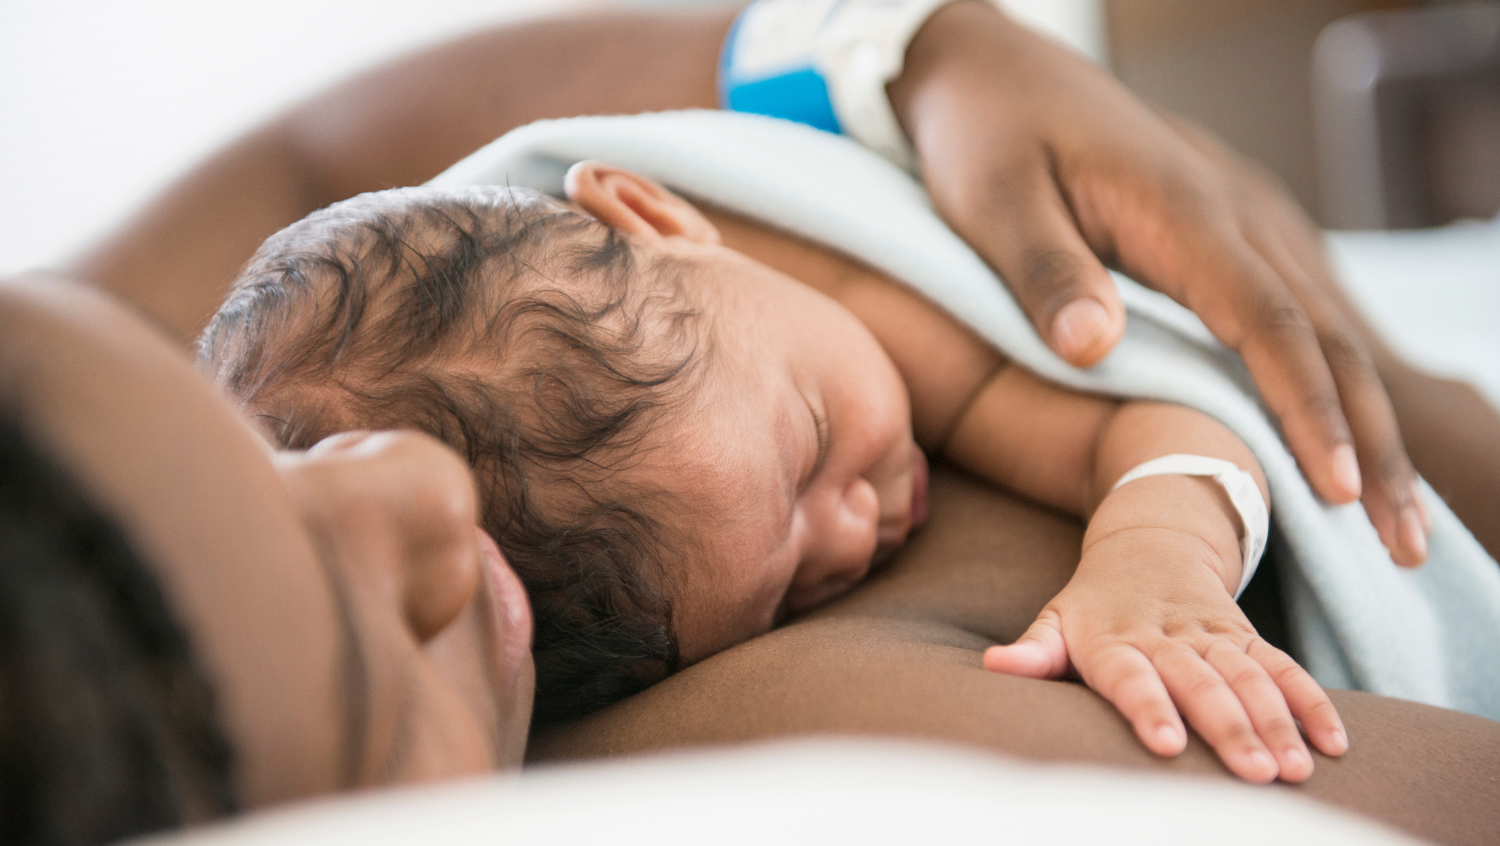 A Black woman sleeping with her newborn baby on a hospital bed. The baby's is lying on top of the mother and the mother is resting her hand gently over the baby's back. The baby has short, dark hair.  